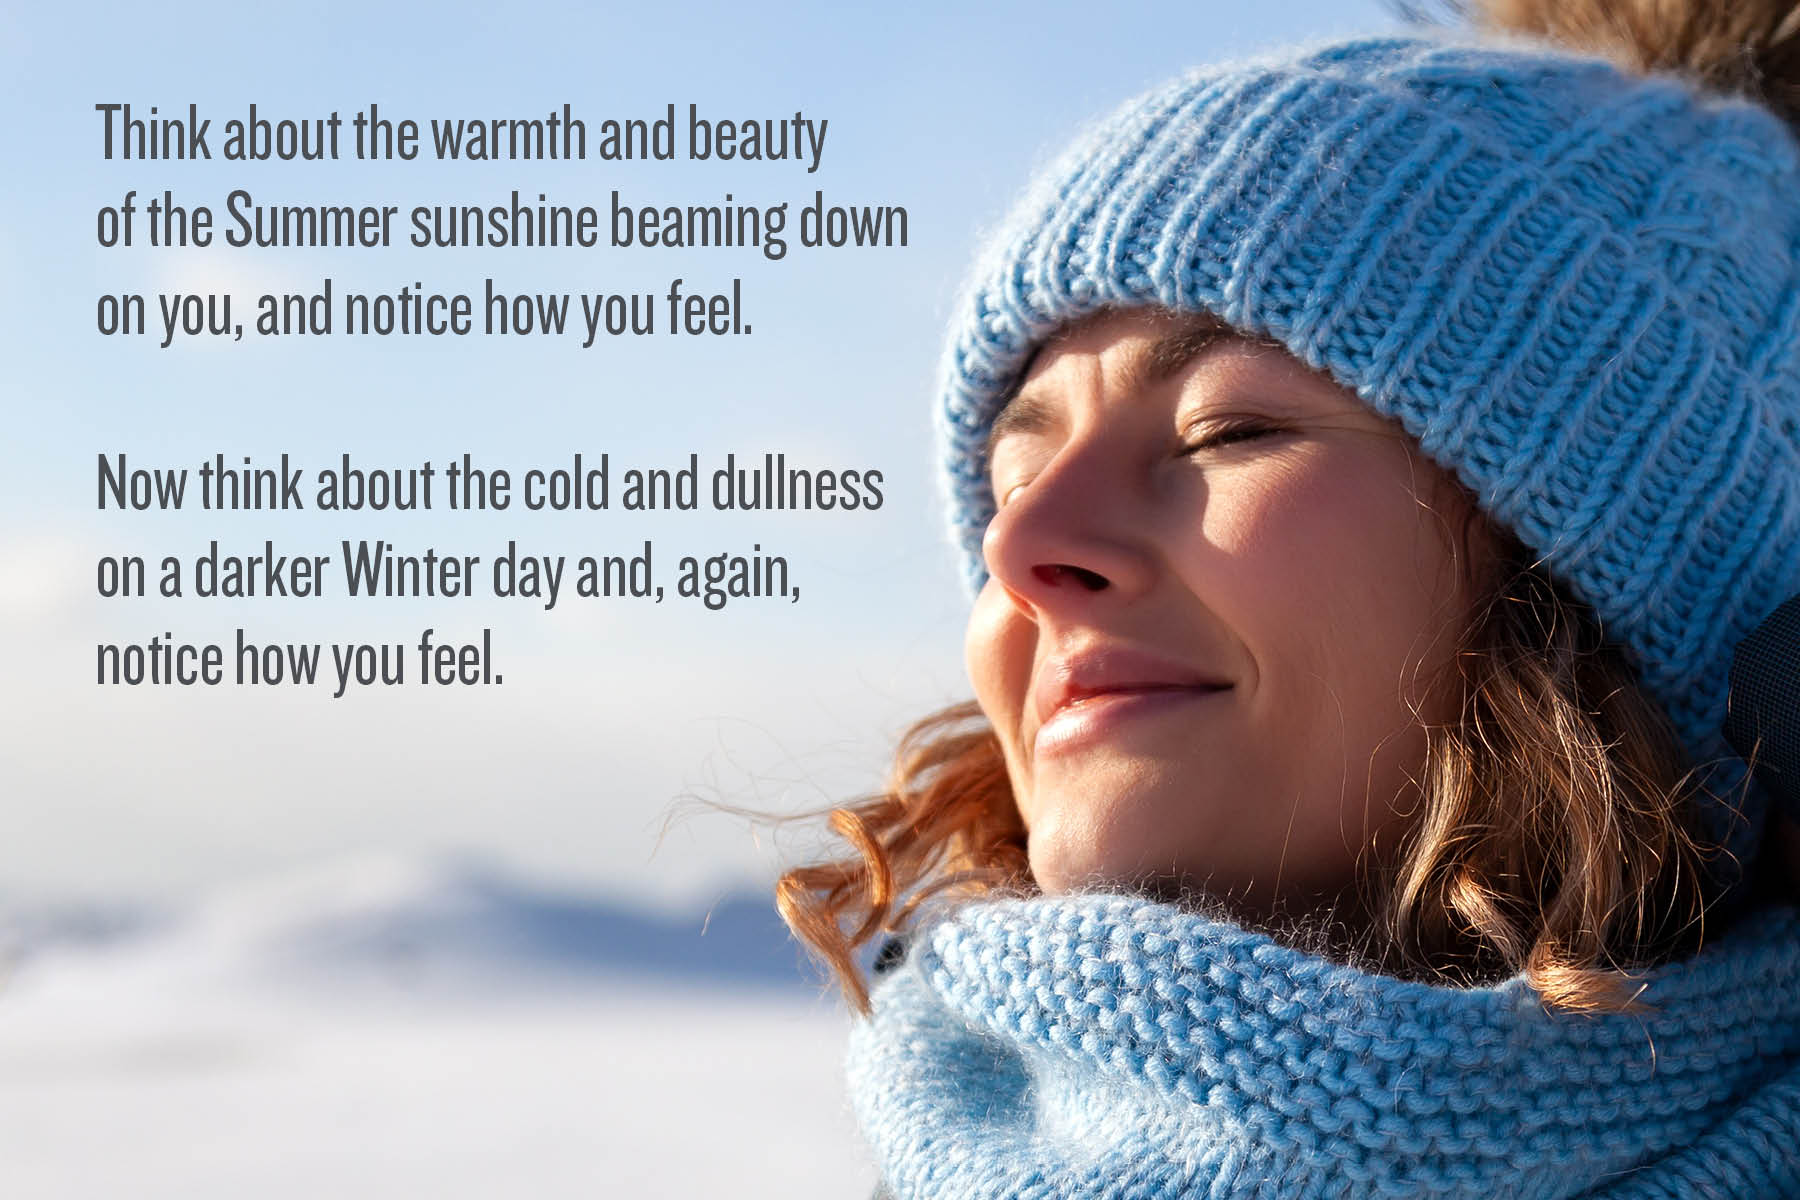 Getting ahead of seasonal affective disorder - quote